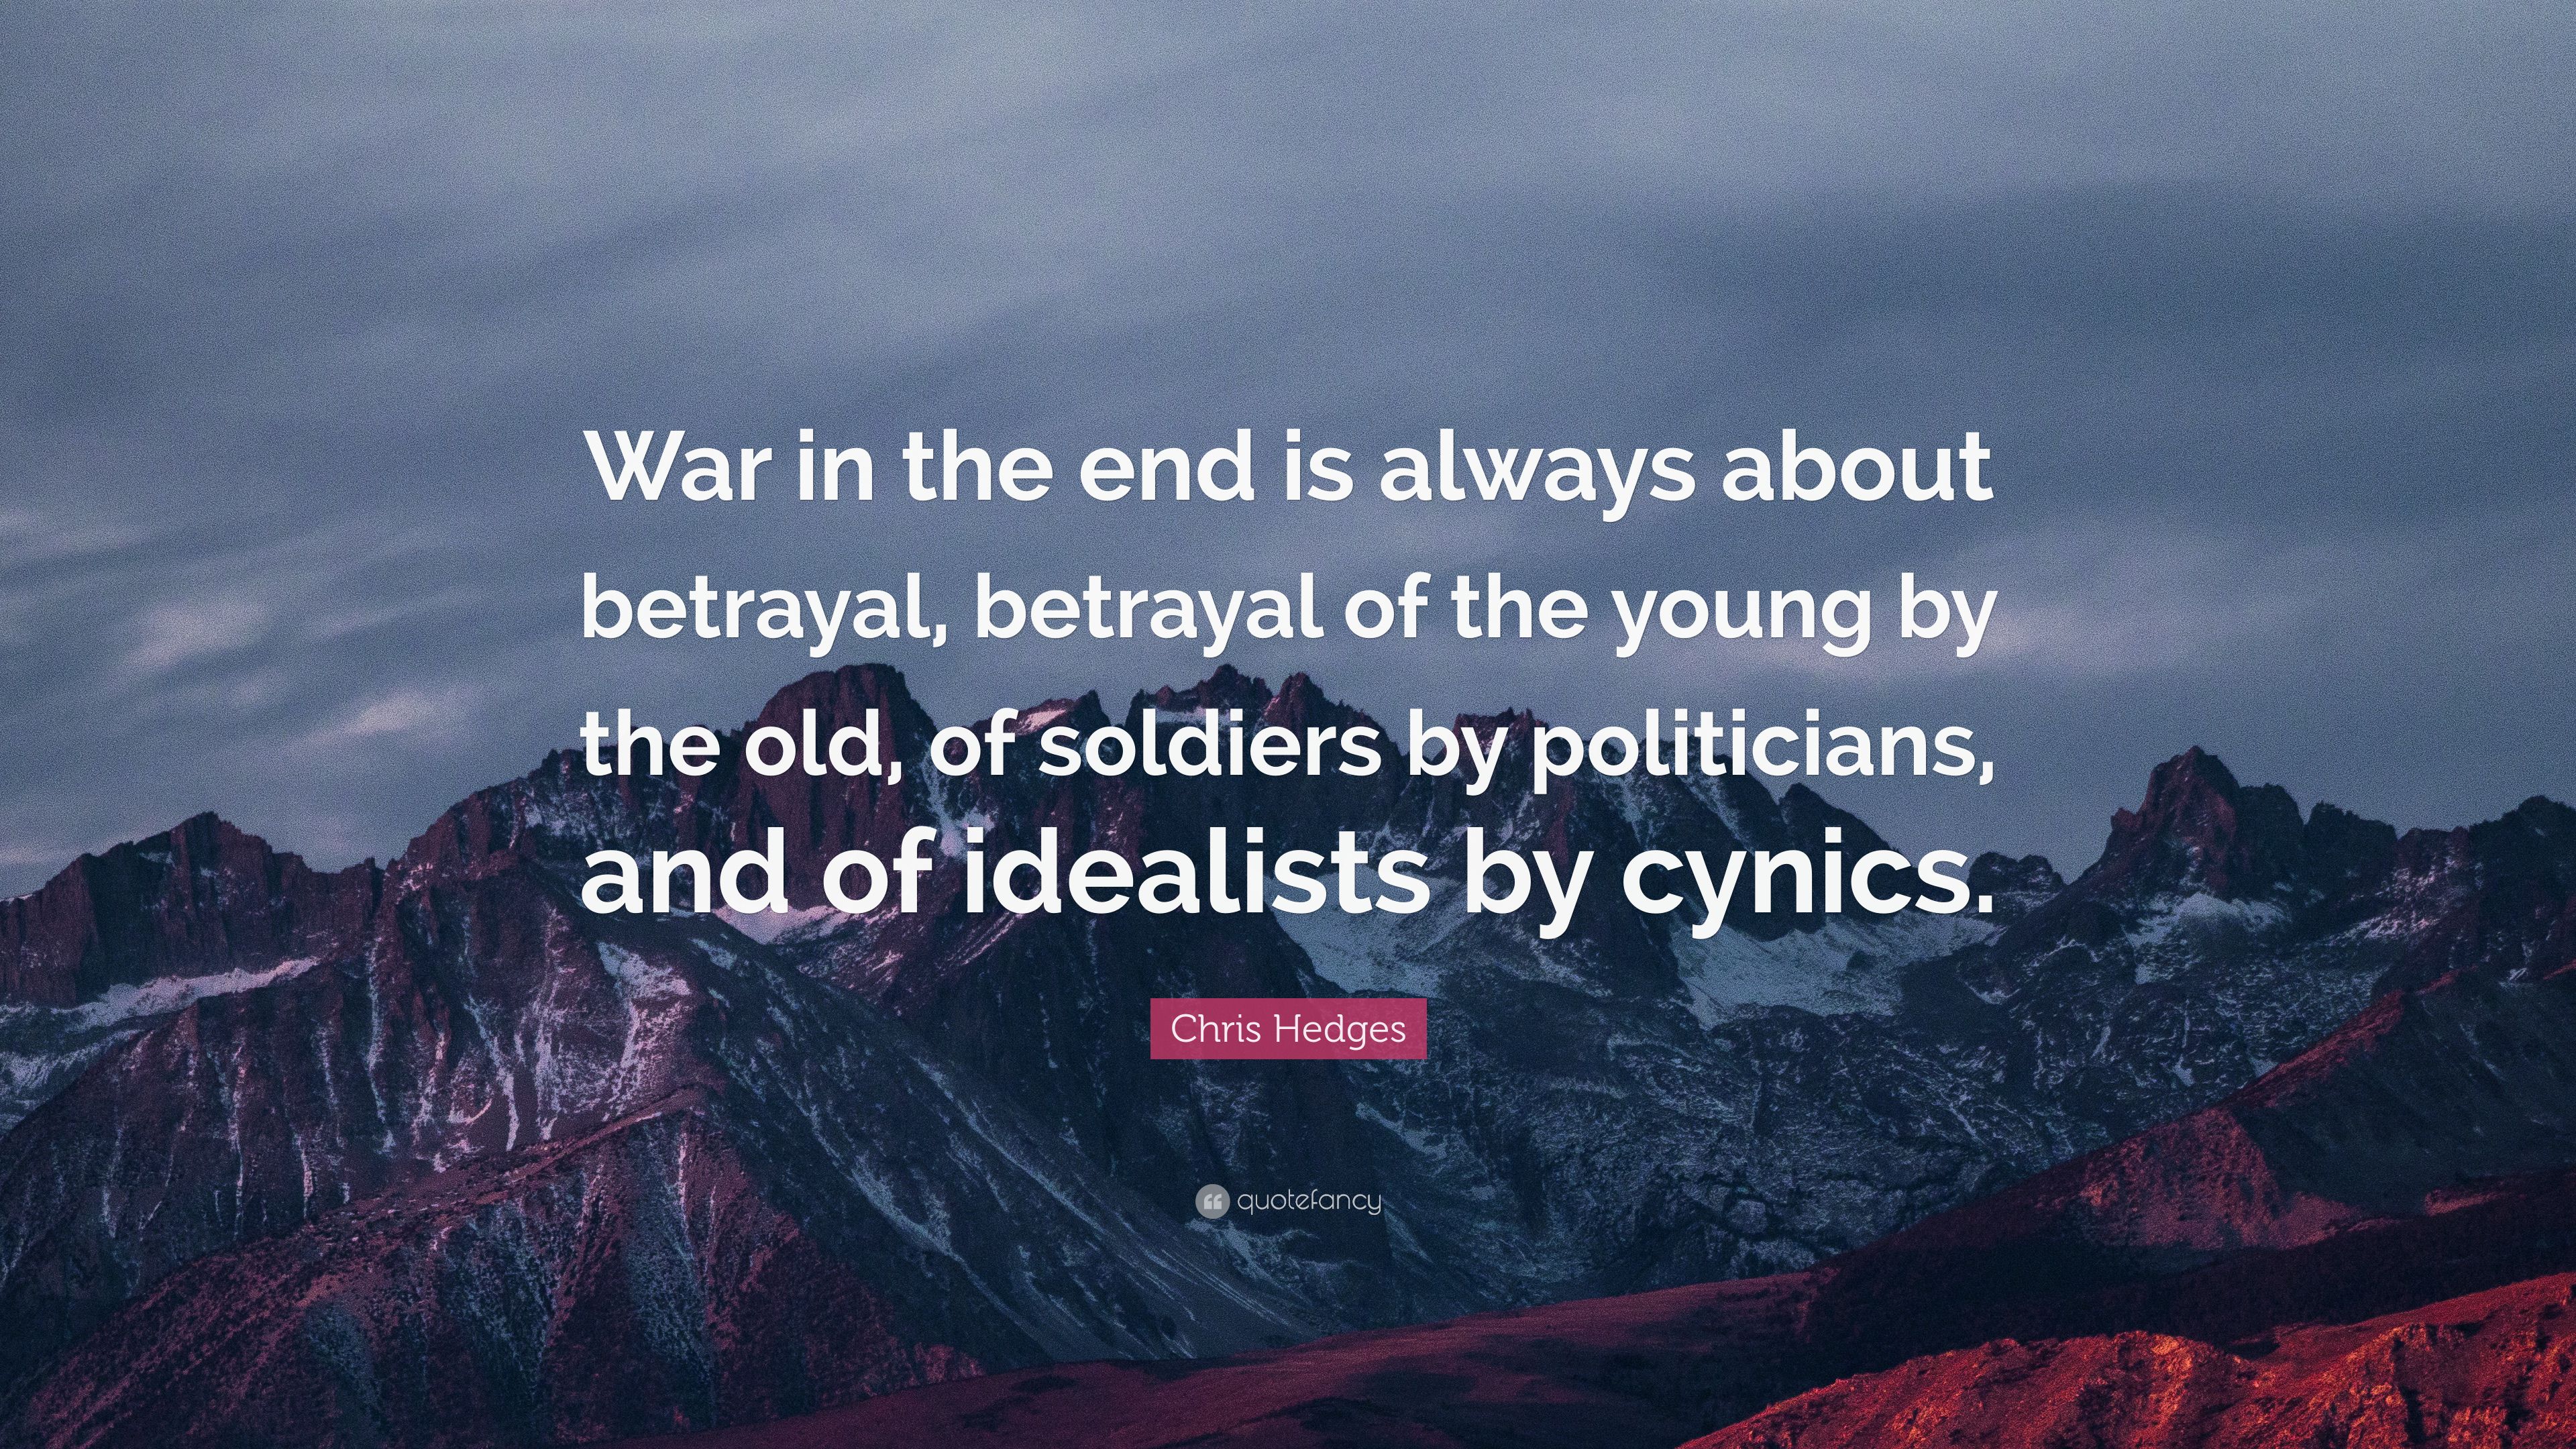 Chris Hedges Quote: “War in the end is always about betrayal